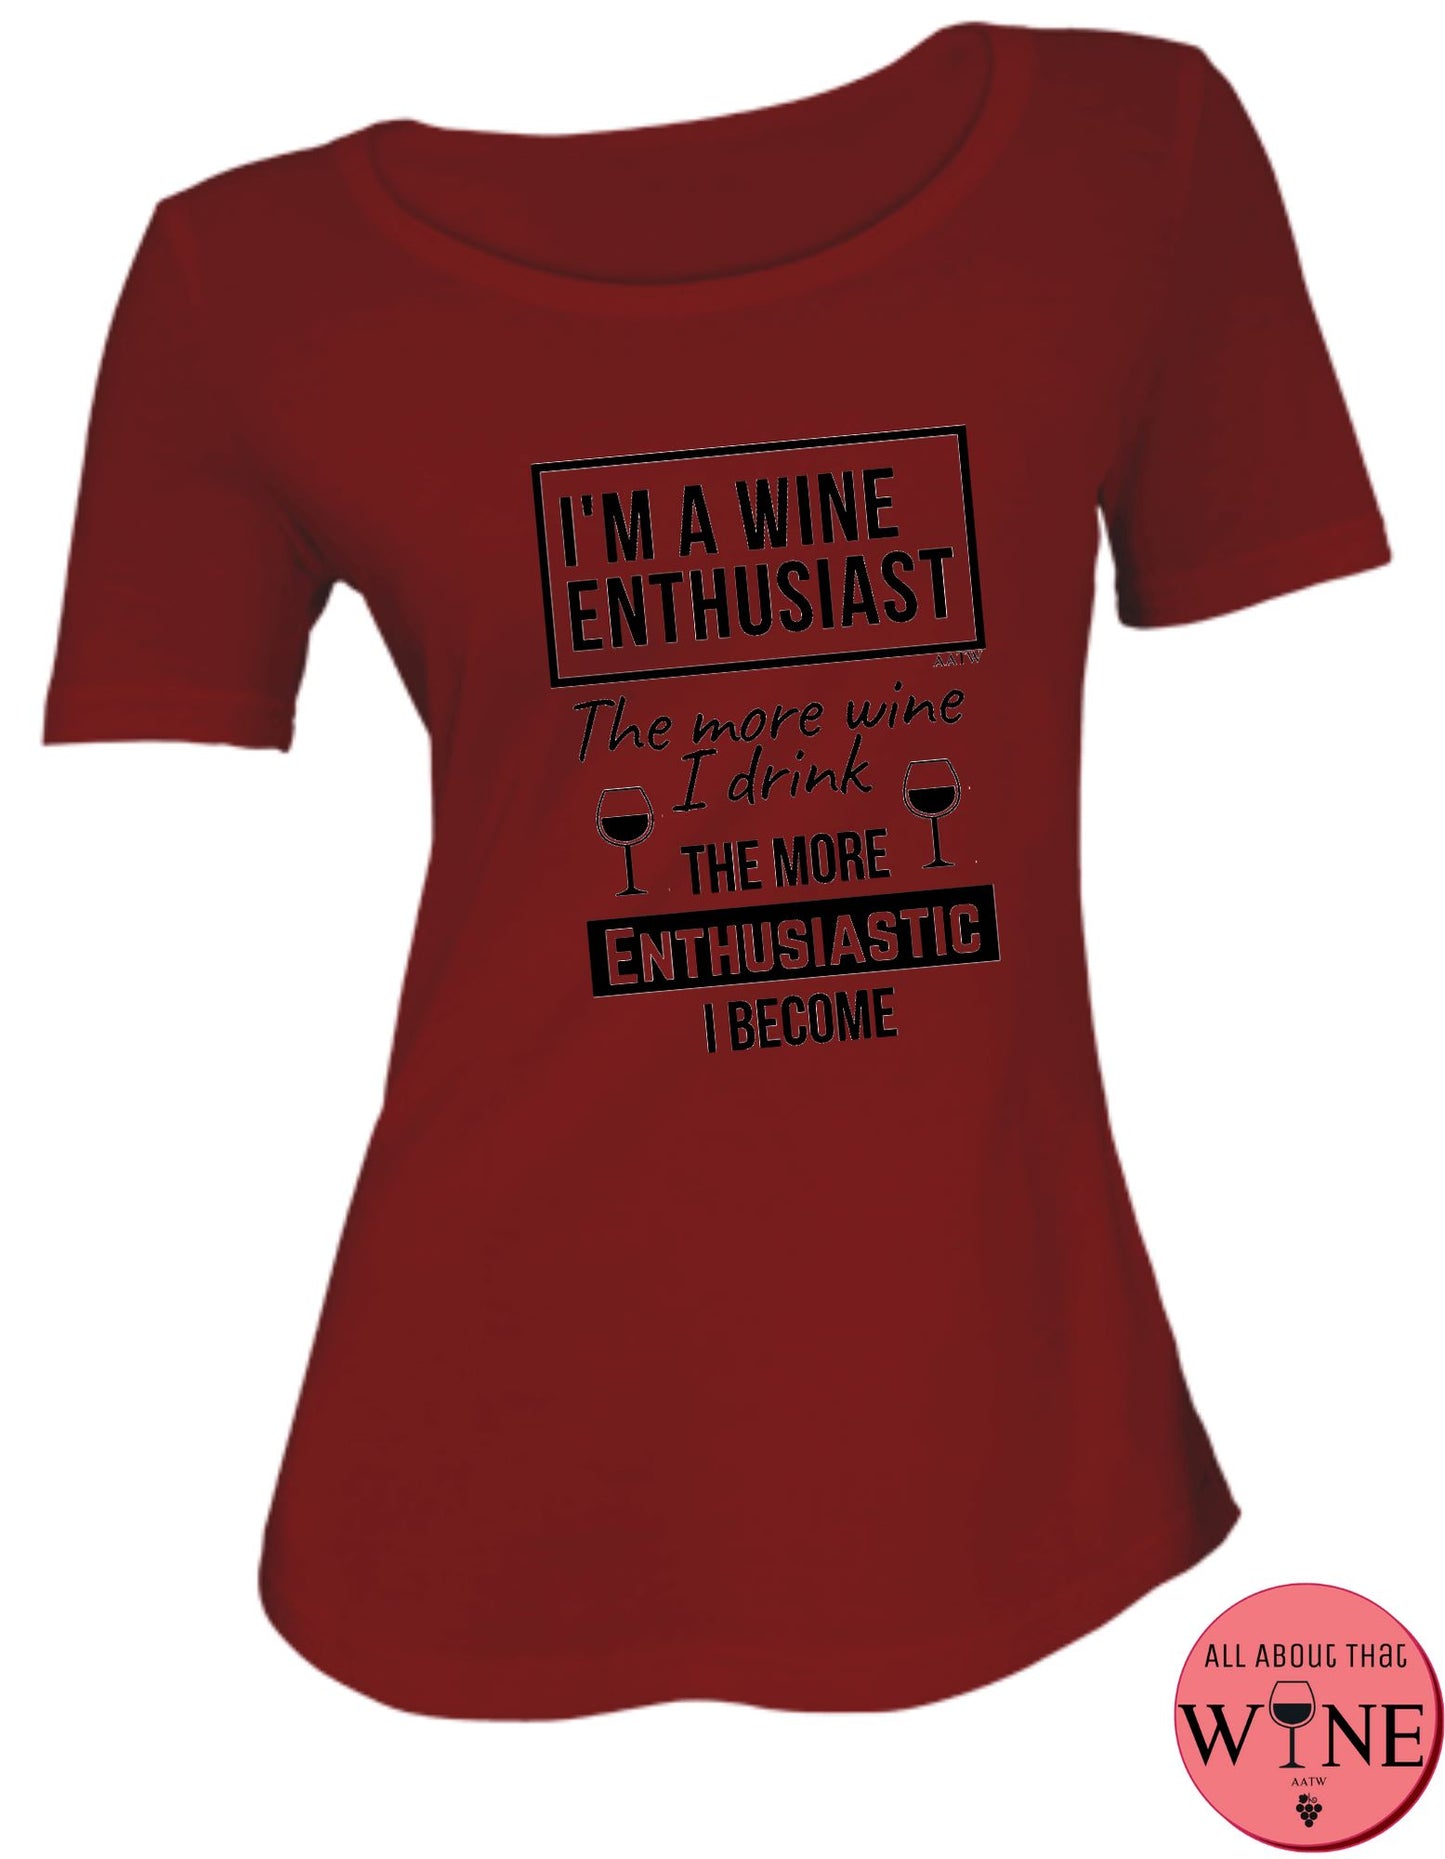 I'm A Wine Enthusiast S Deep red with black